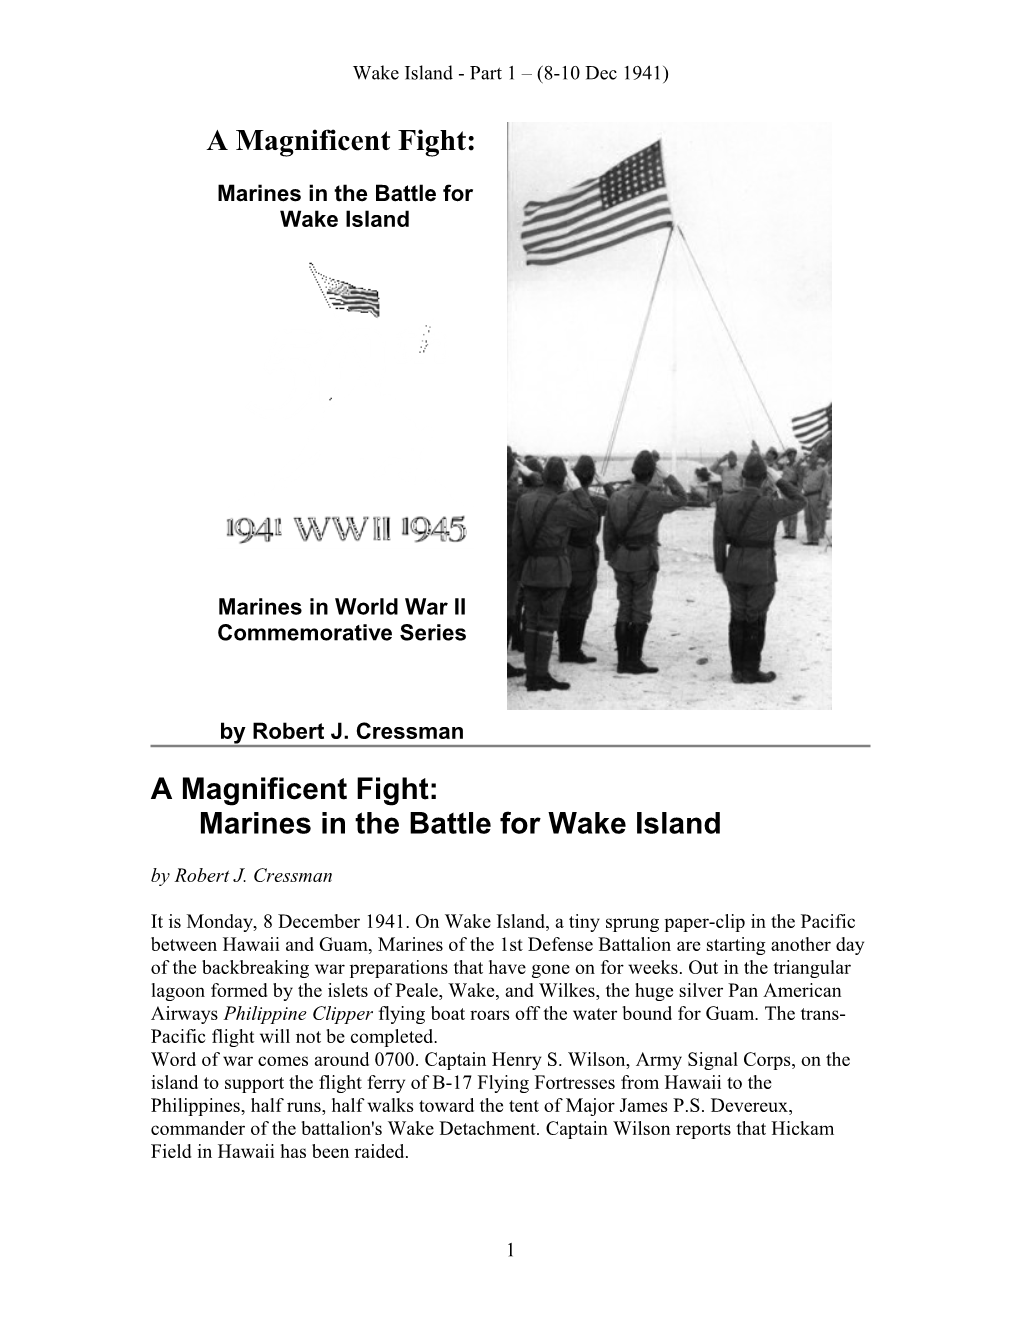 A Magnificent Fight:Marines in the Battle for Wake Island